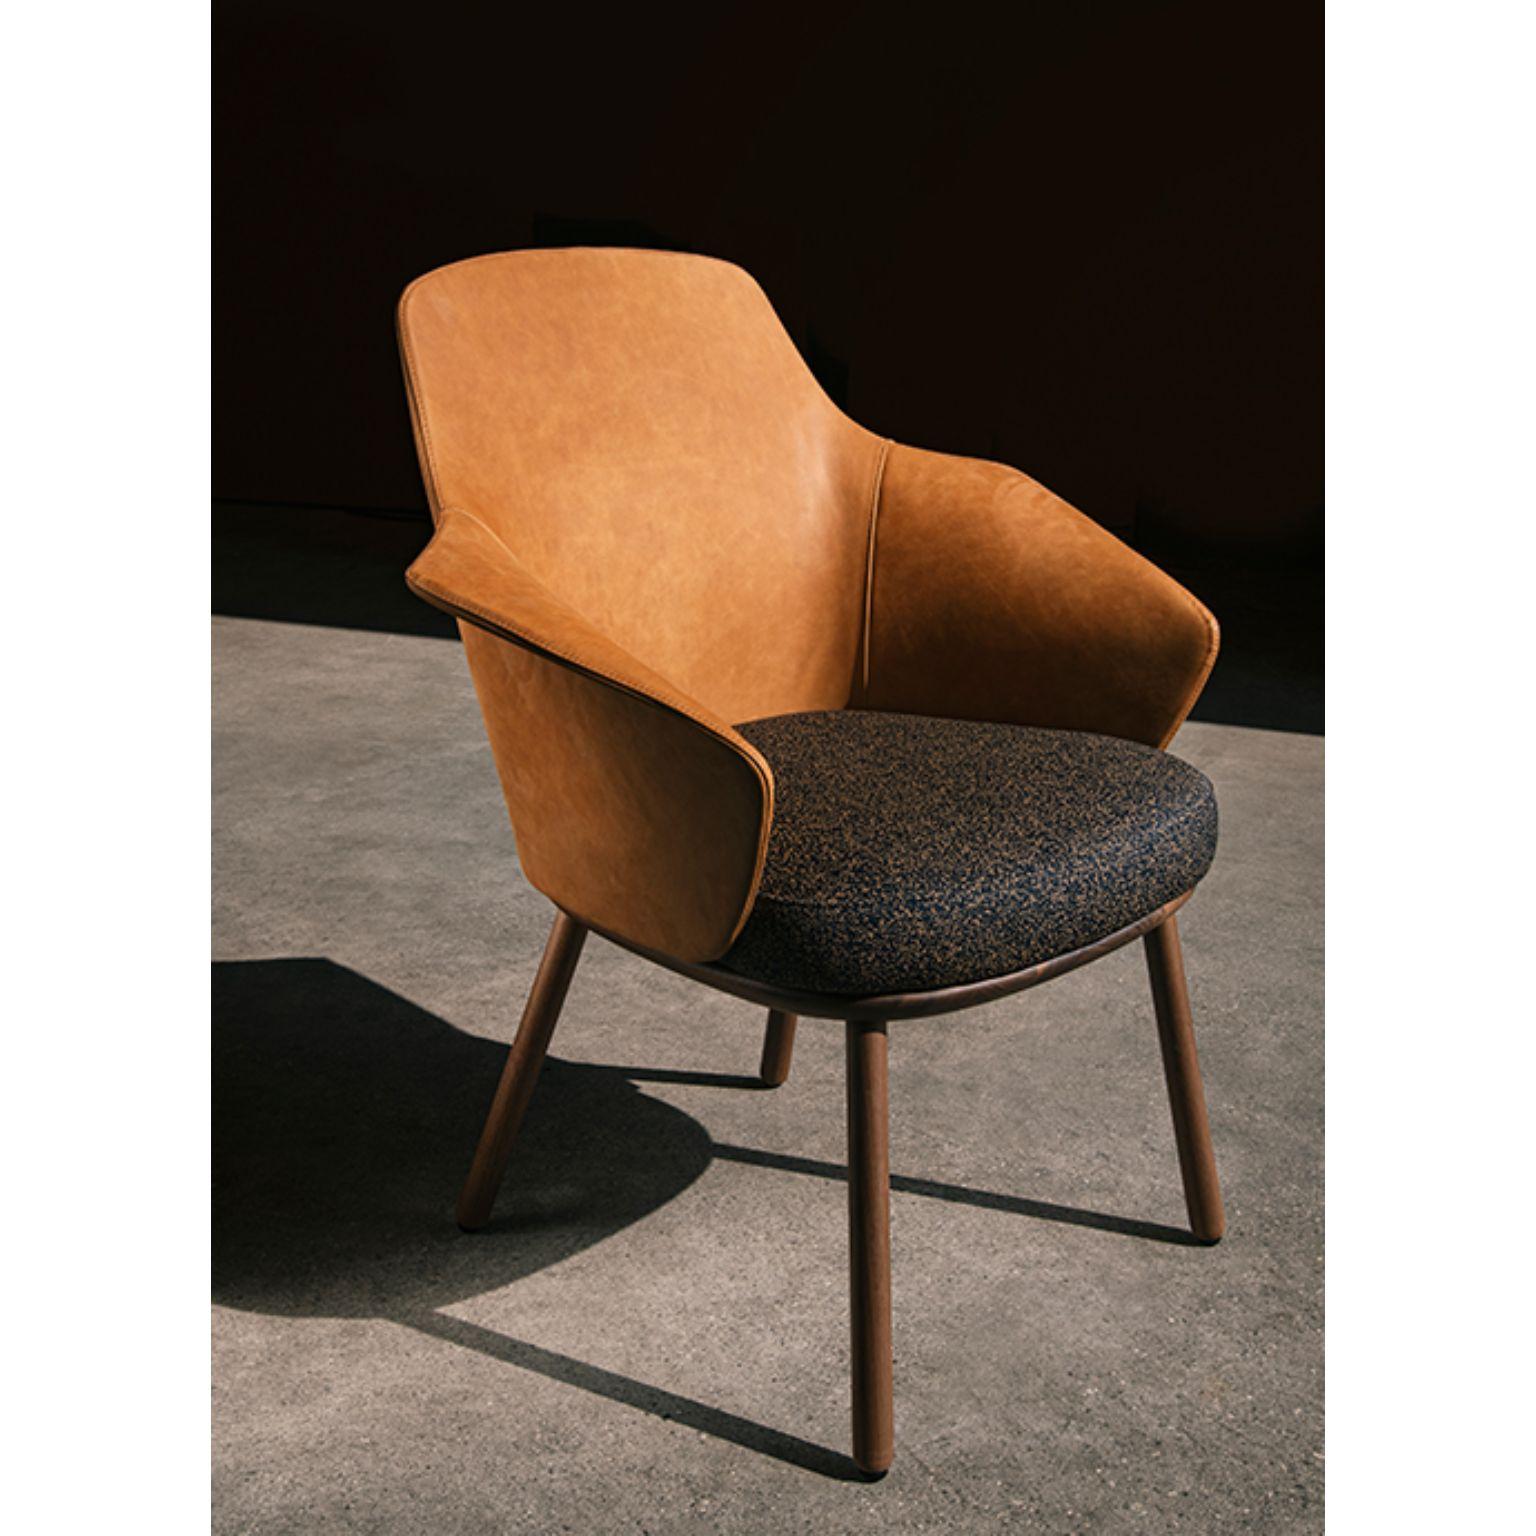 Linus armchair by MarCo Dessí.
Materials: upholstery: fabric
Structure: wood: Noce Canaletto solid wood, coral/dark green/black stained wood
 Also available metal: Black powder-coated metal, black chrome metal

Dimensions: W71.9 x D60.2 x H86.3